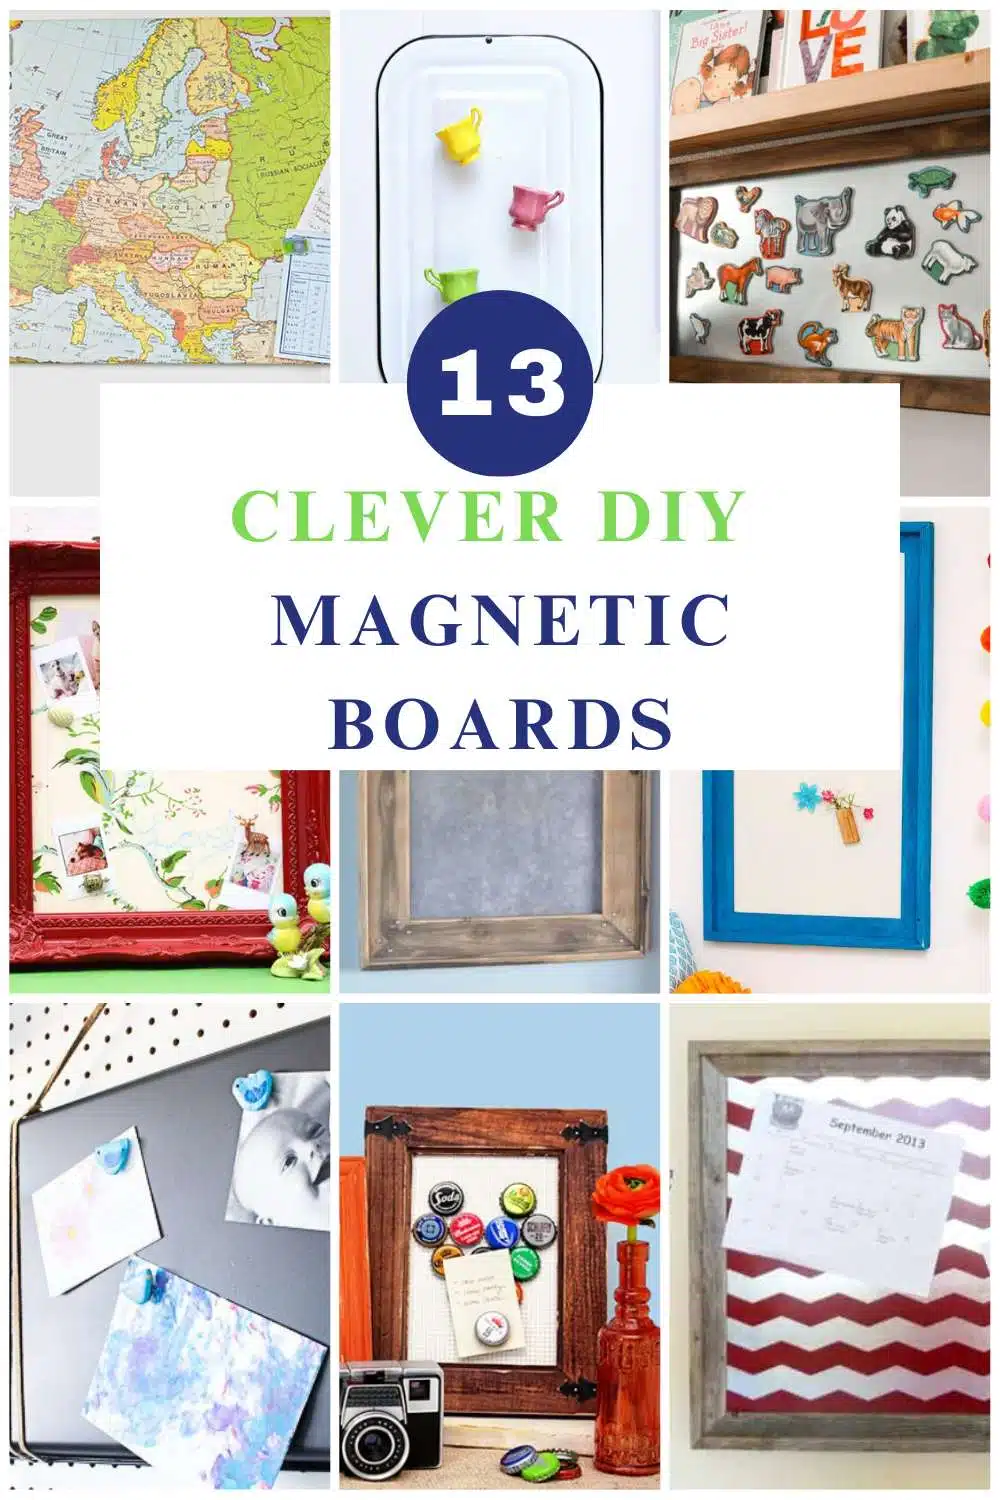 13 DIY Magnetic Boards And Unique Handmade Magnets